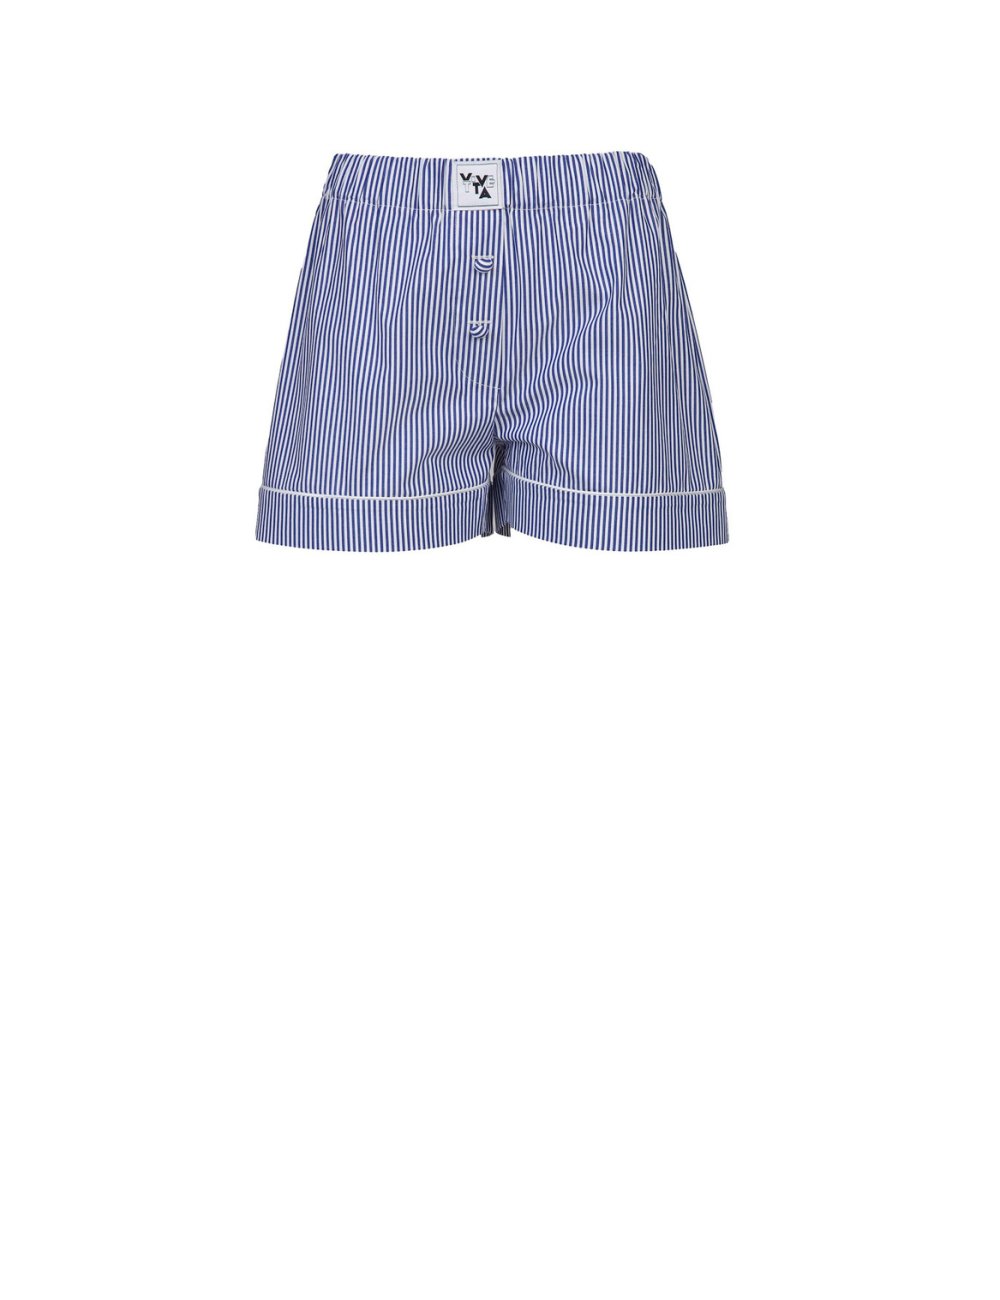 SS24 Short a righe